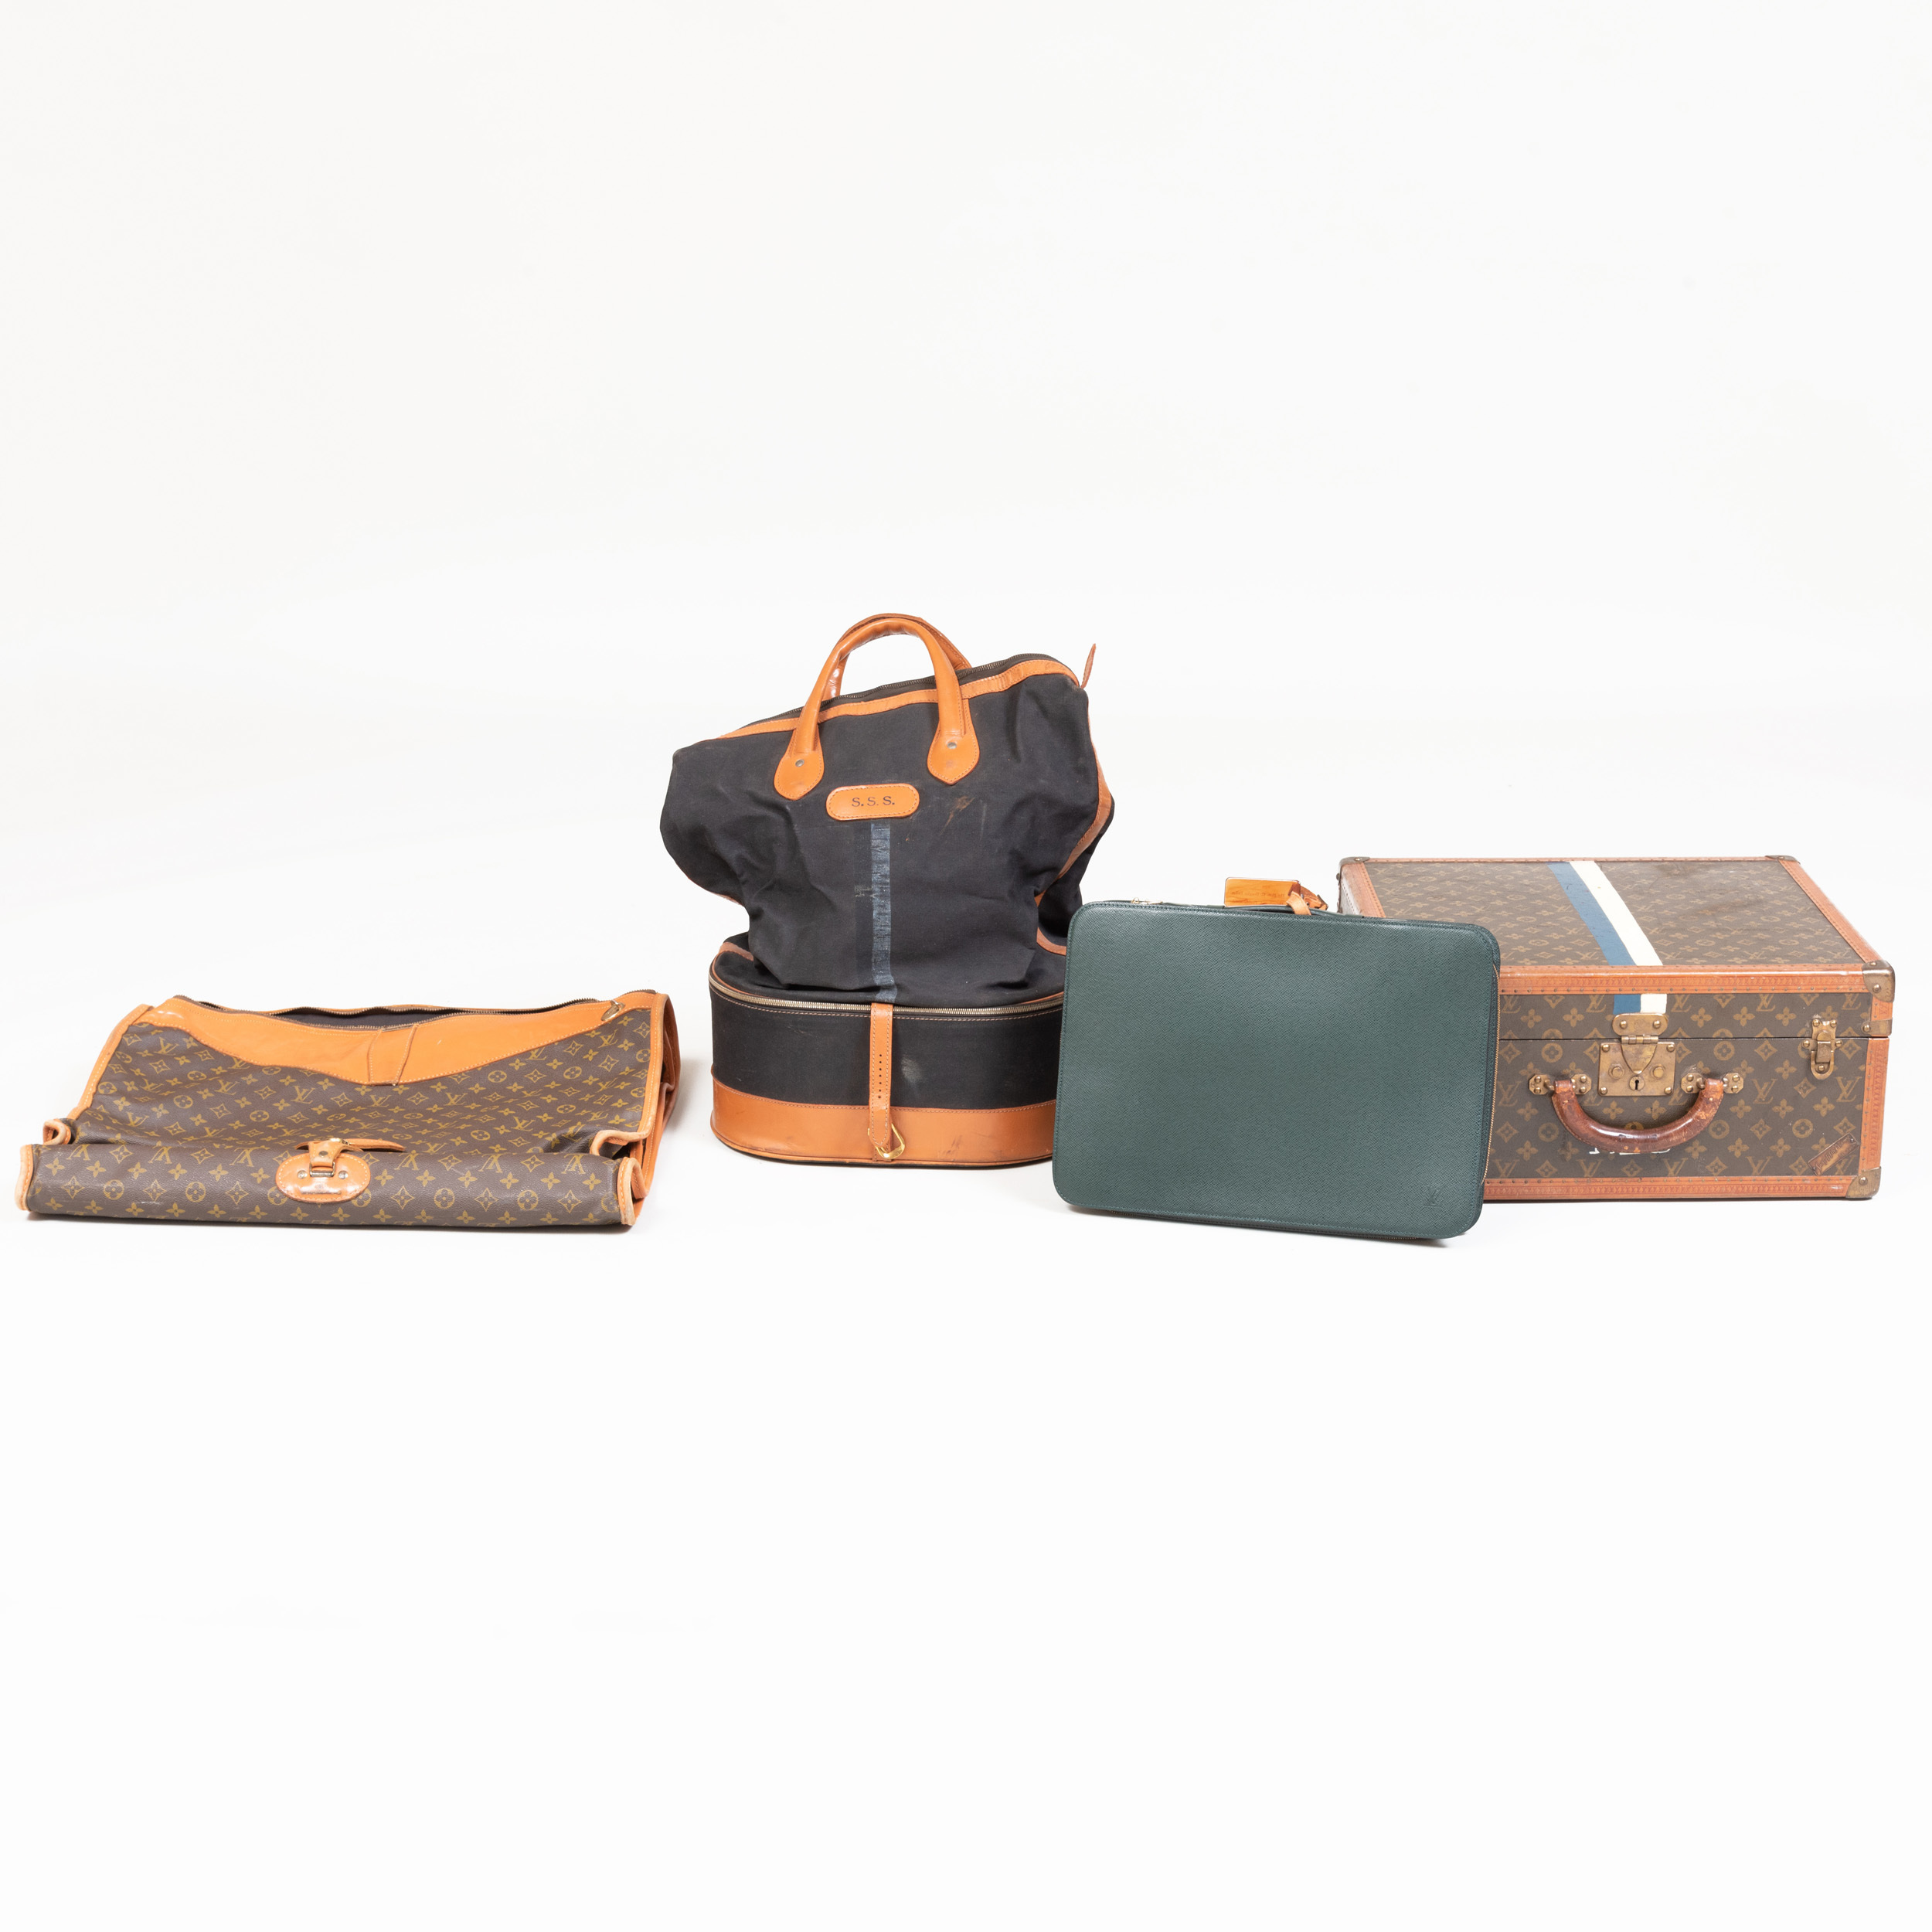 Group of Three Louis Vuitton Items | Auction House Website